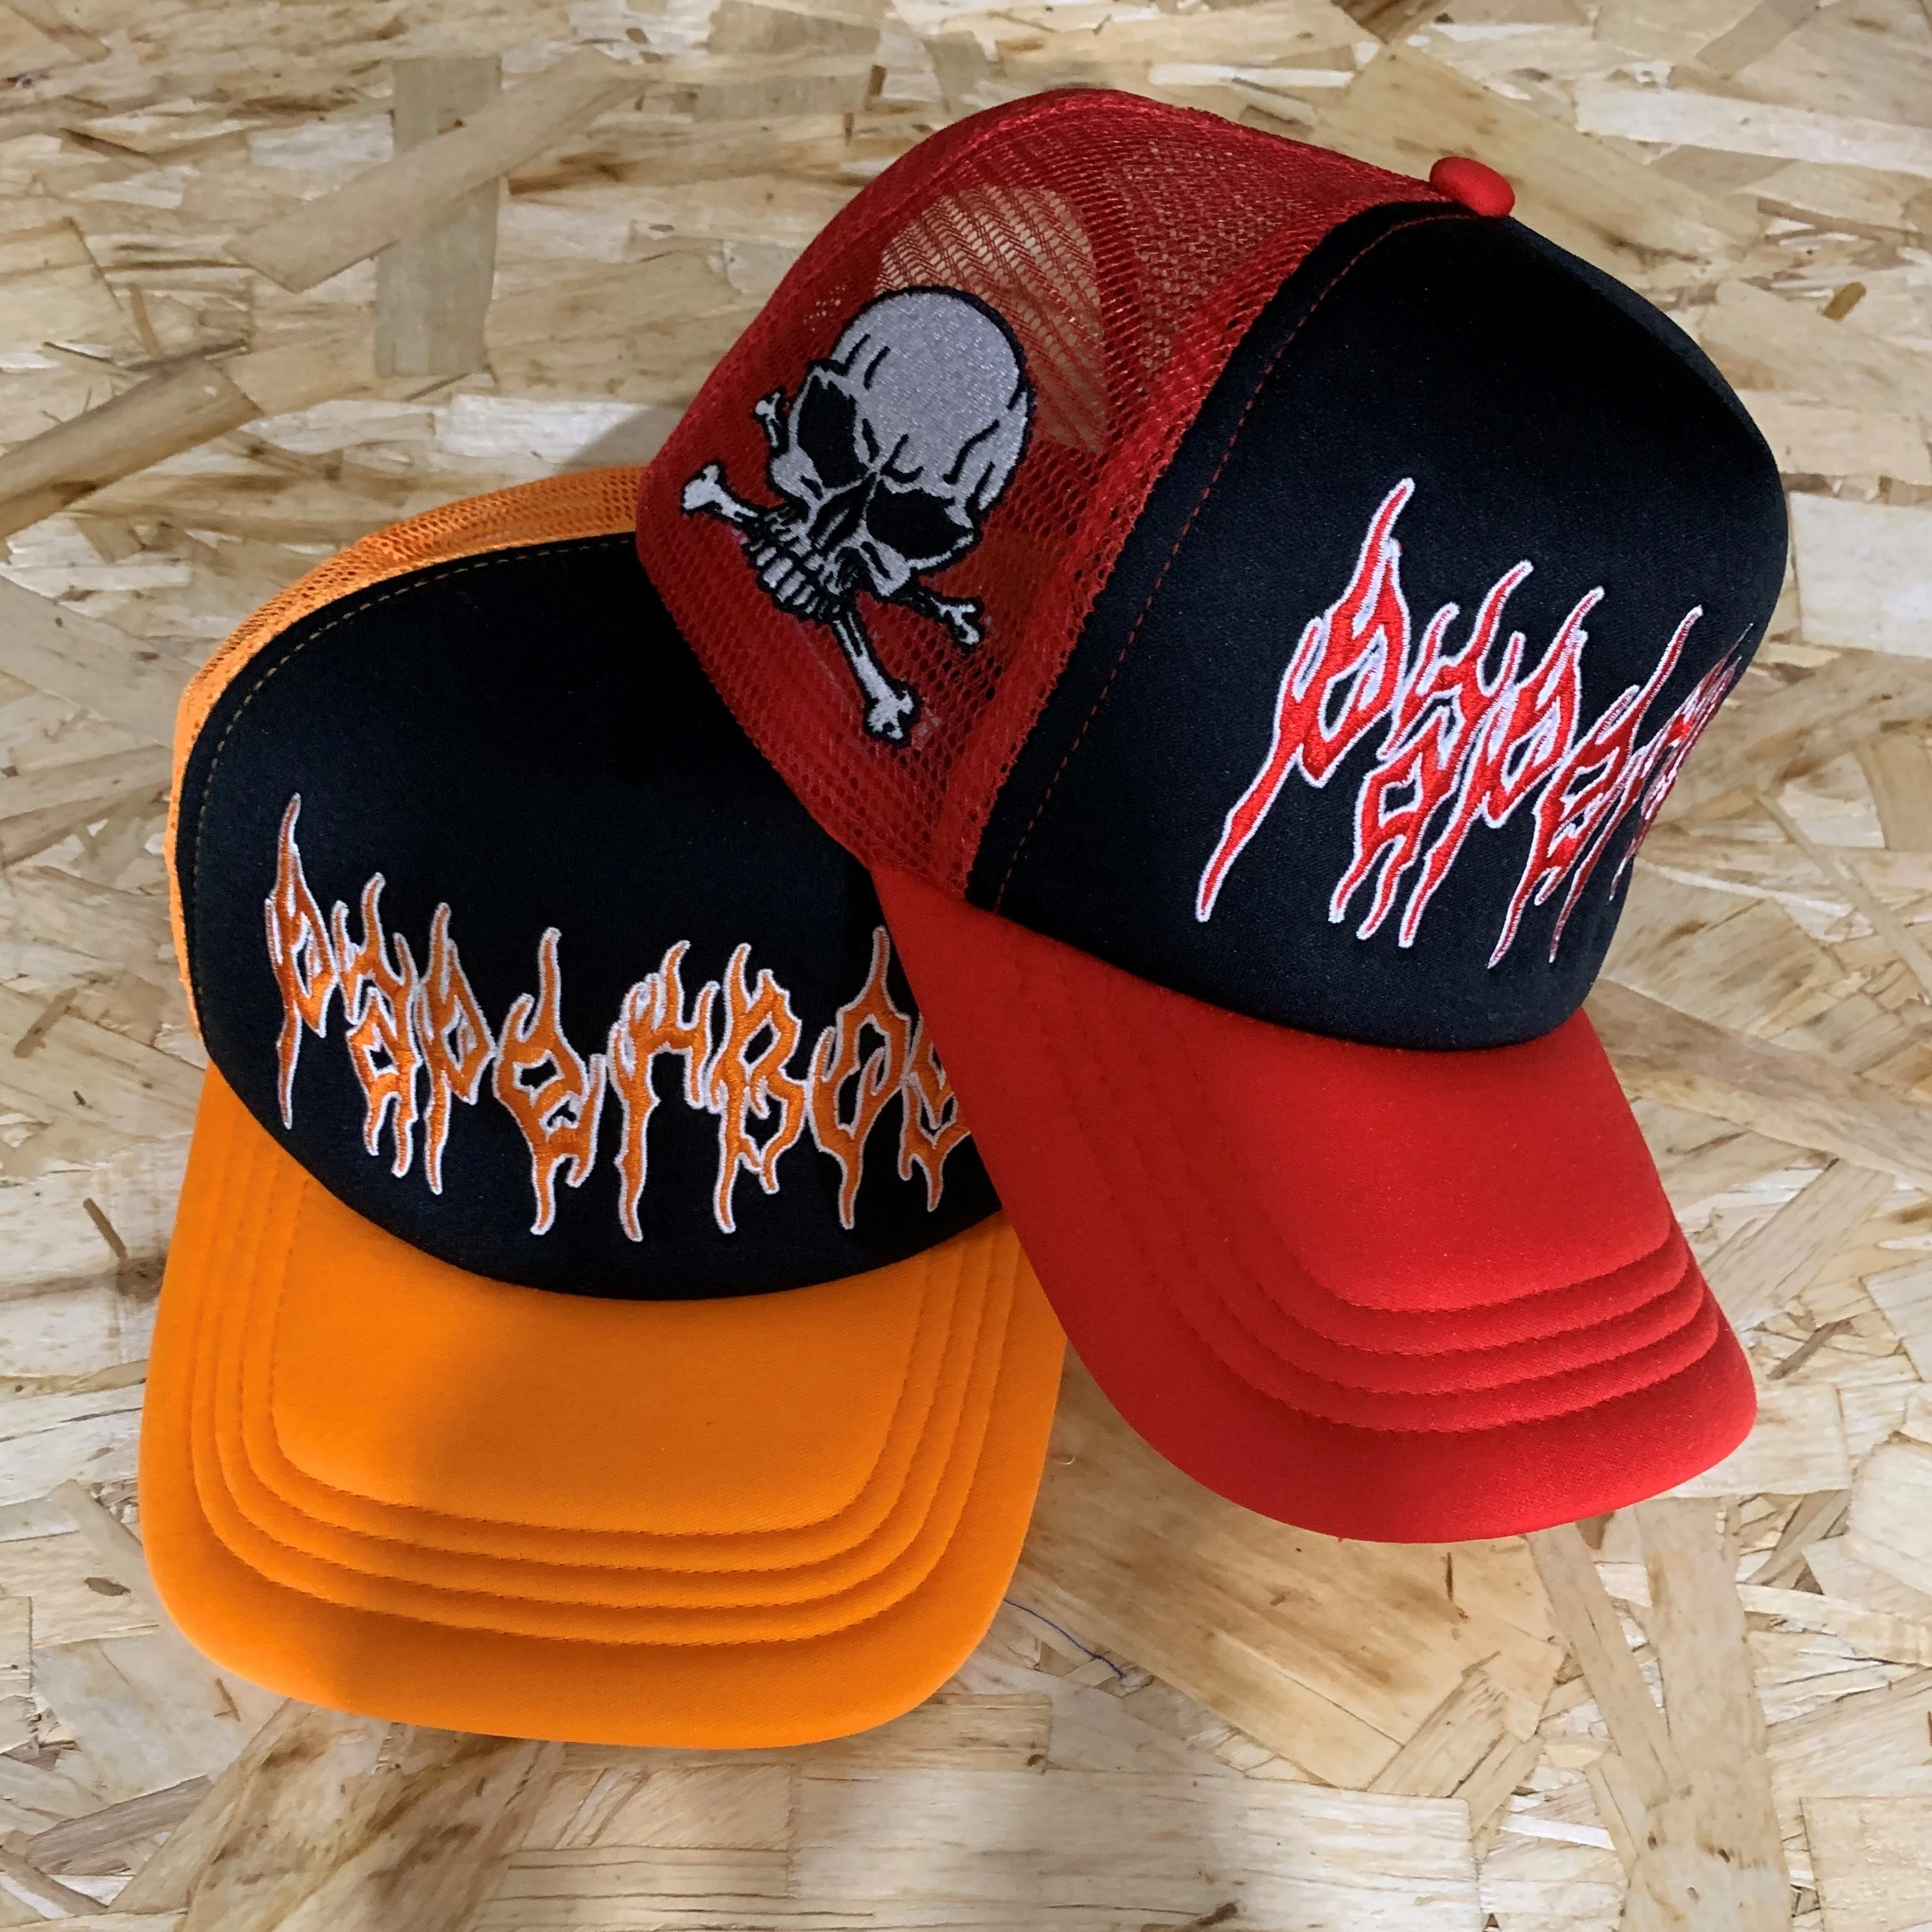 

Customize any color trucker hat red and black truck cap oversized embroidered logo